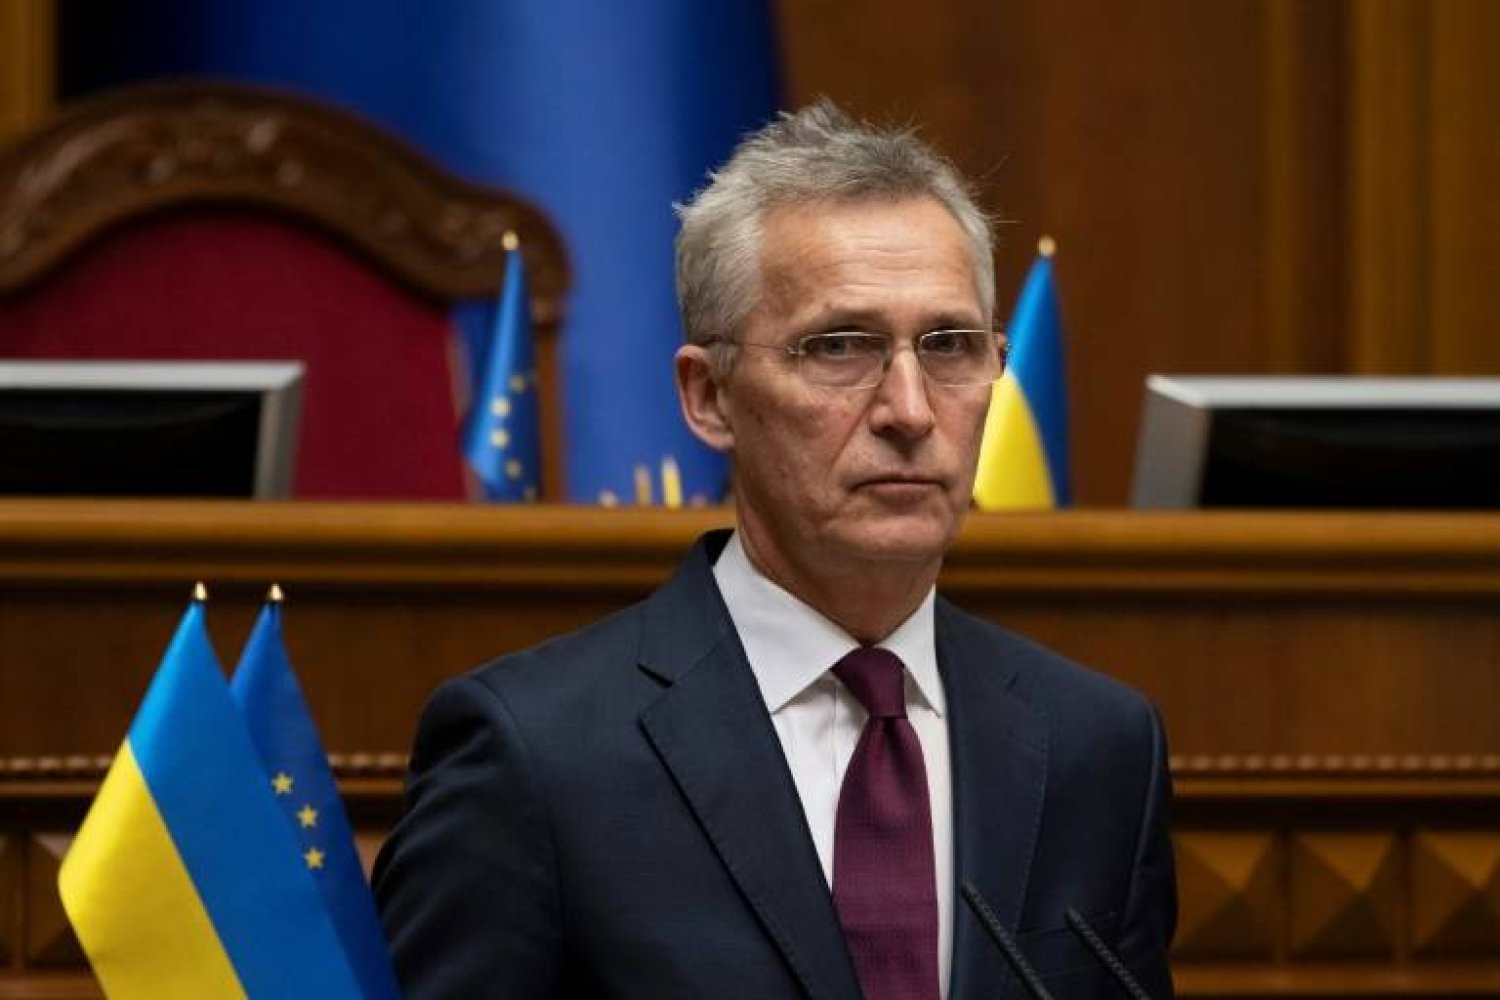 NATO Secretary General Jens Stoltenberg said 'Ukraine has been outgunned for months' but that 'more support is on the way'  - AFP
